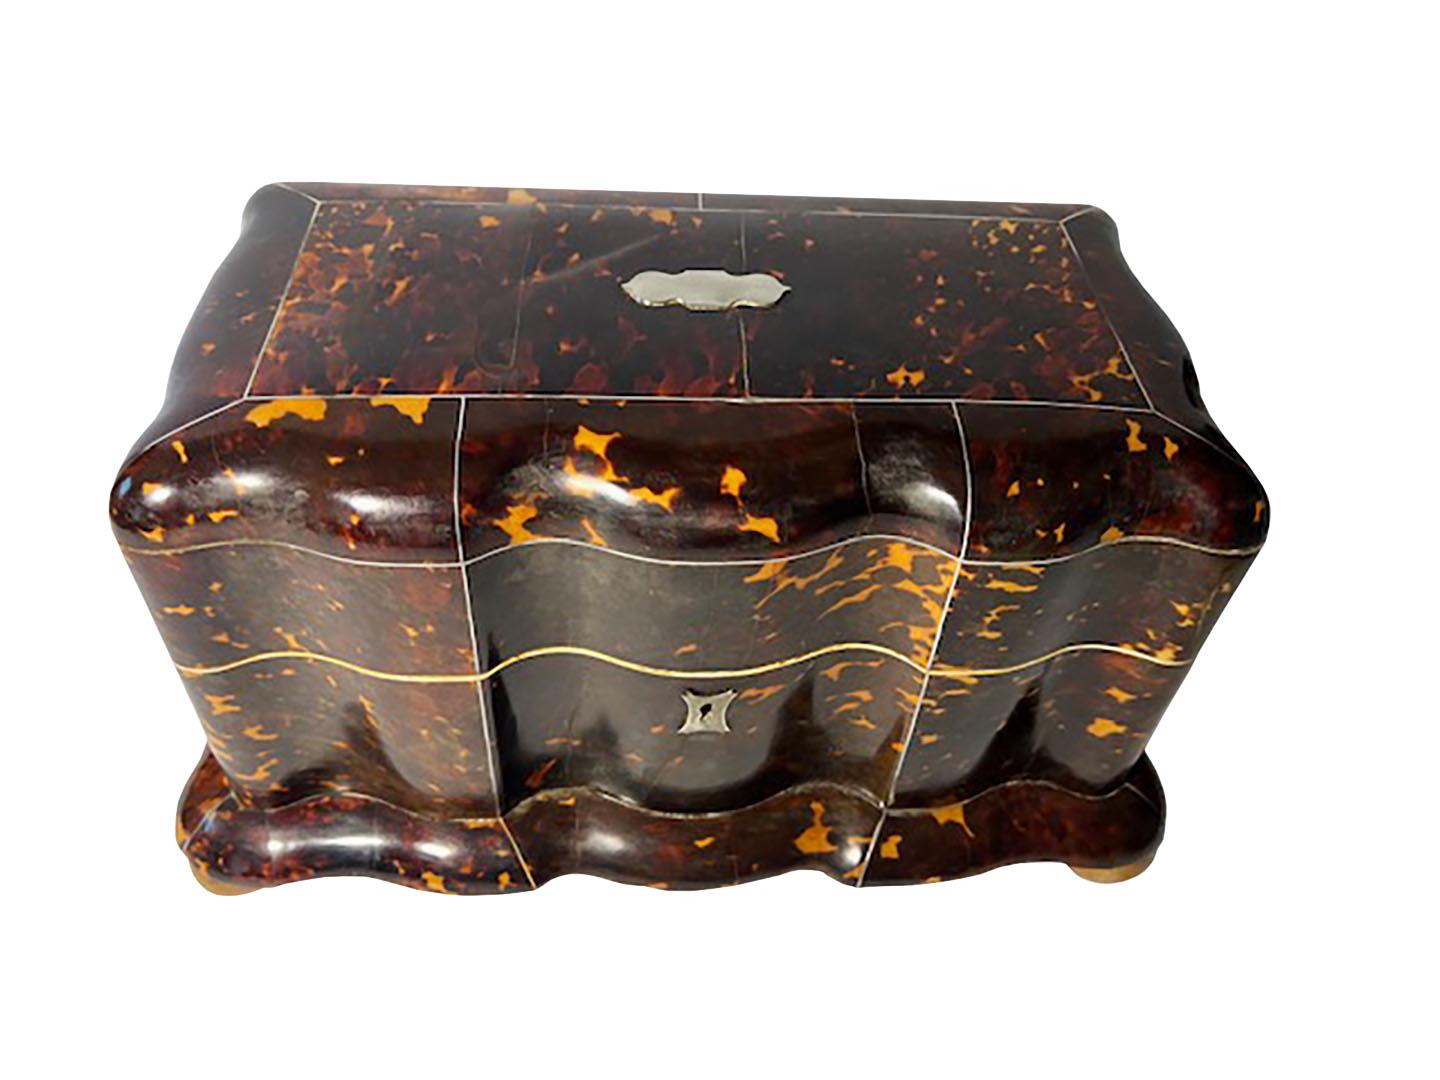 A very large faux tortoiseshell tea caddy from England. Lovely shape and sterling plate on top this hasn't been monogramed. Sitting on ball feet, circa 1860.